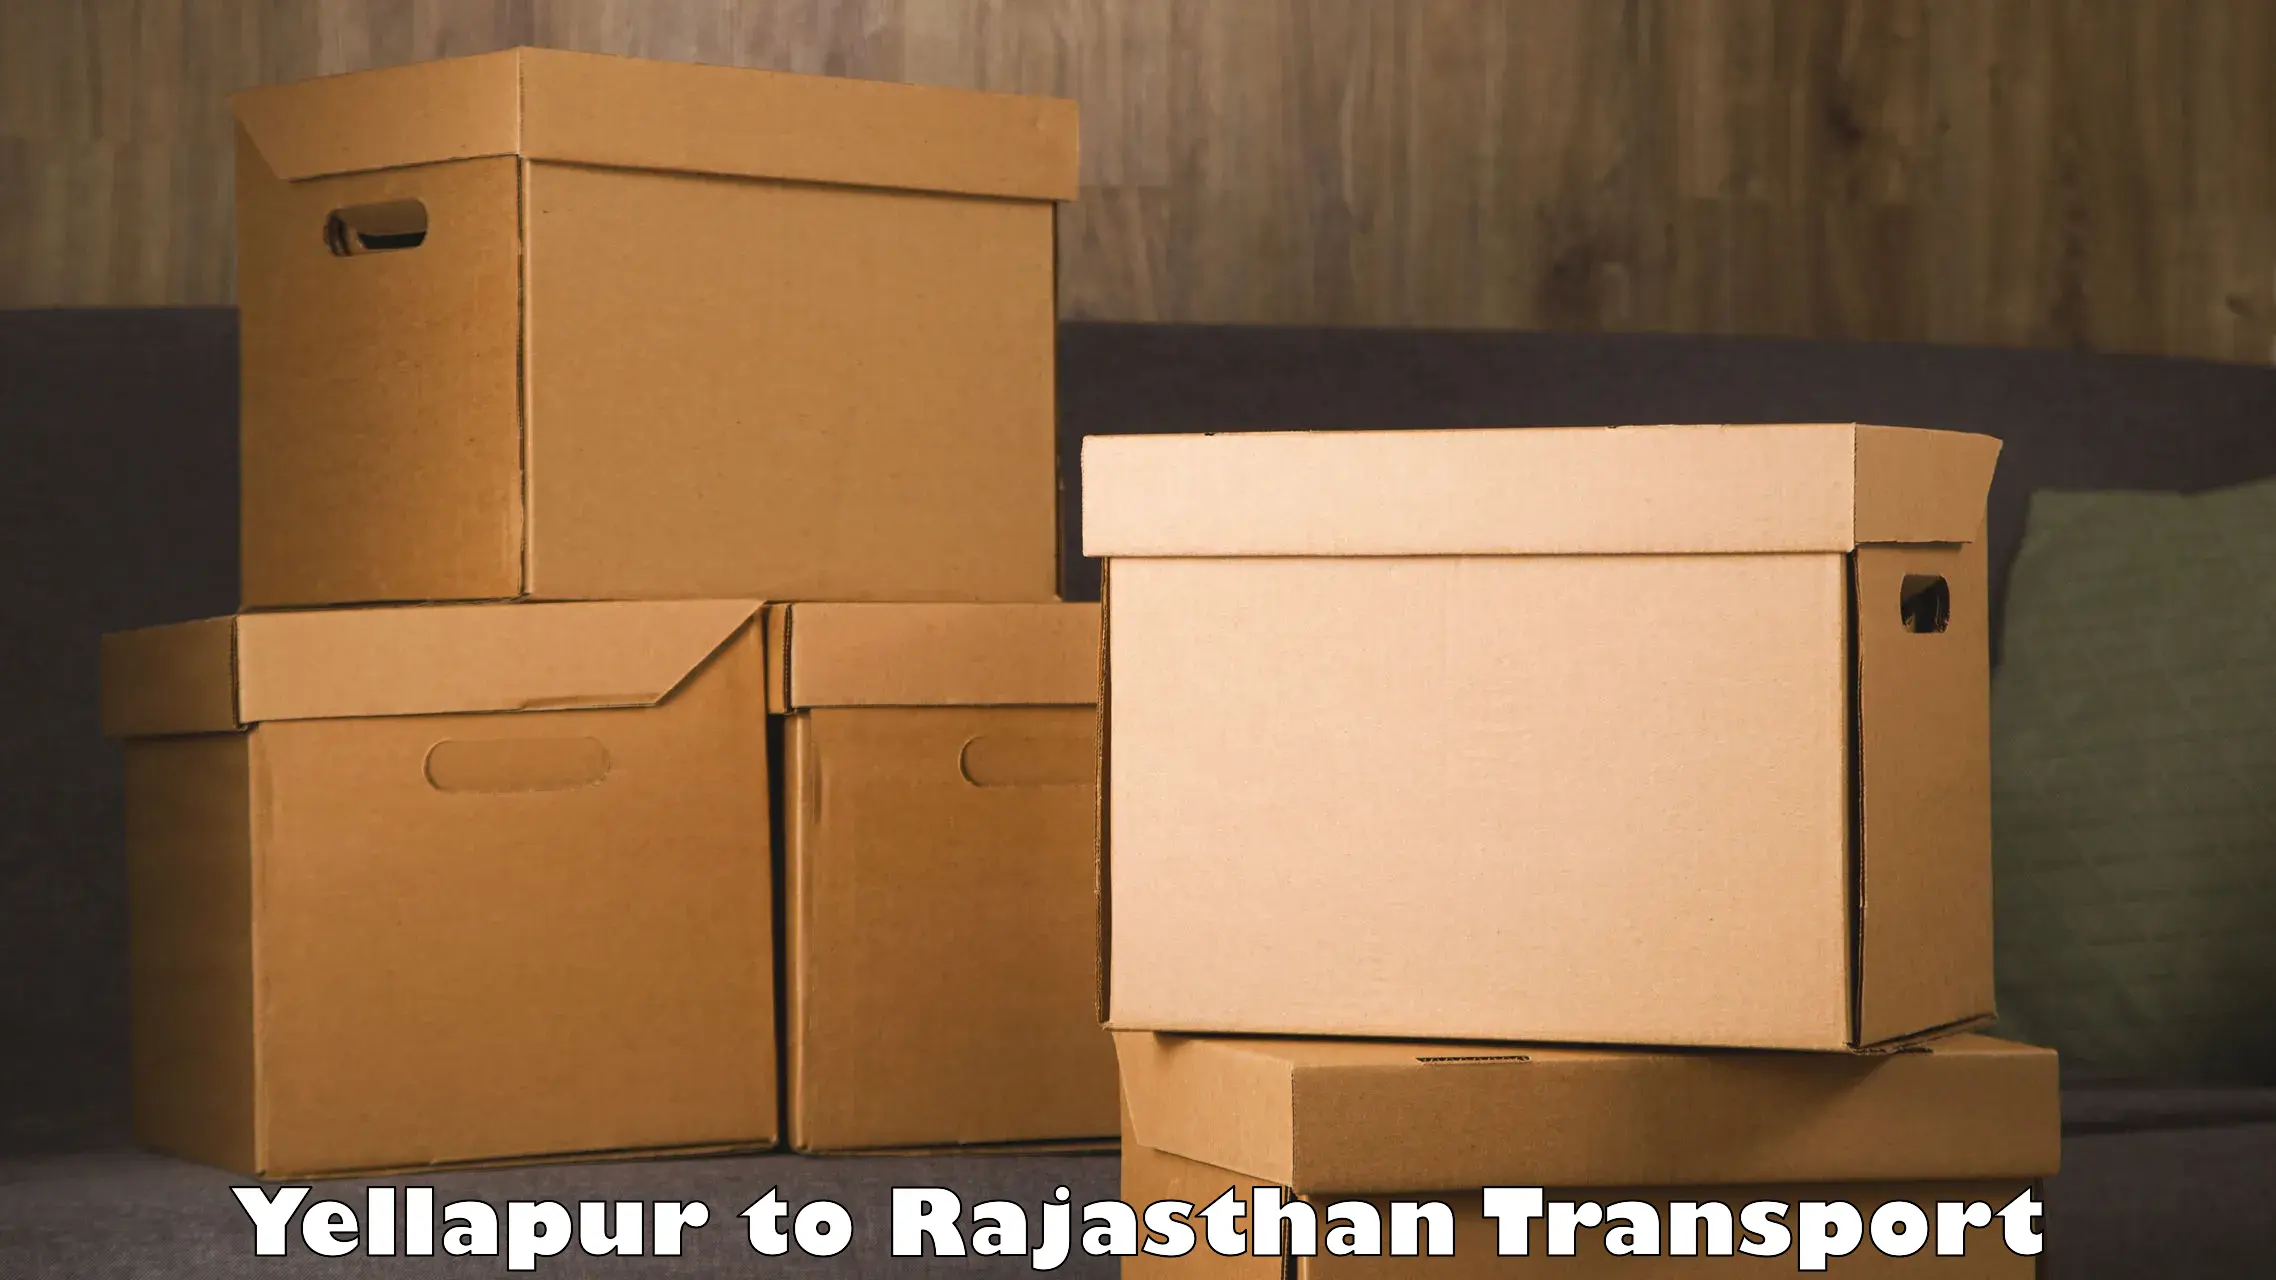 Two wheeler parcel service Yellapur to Yeswanthapur